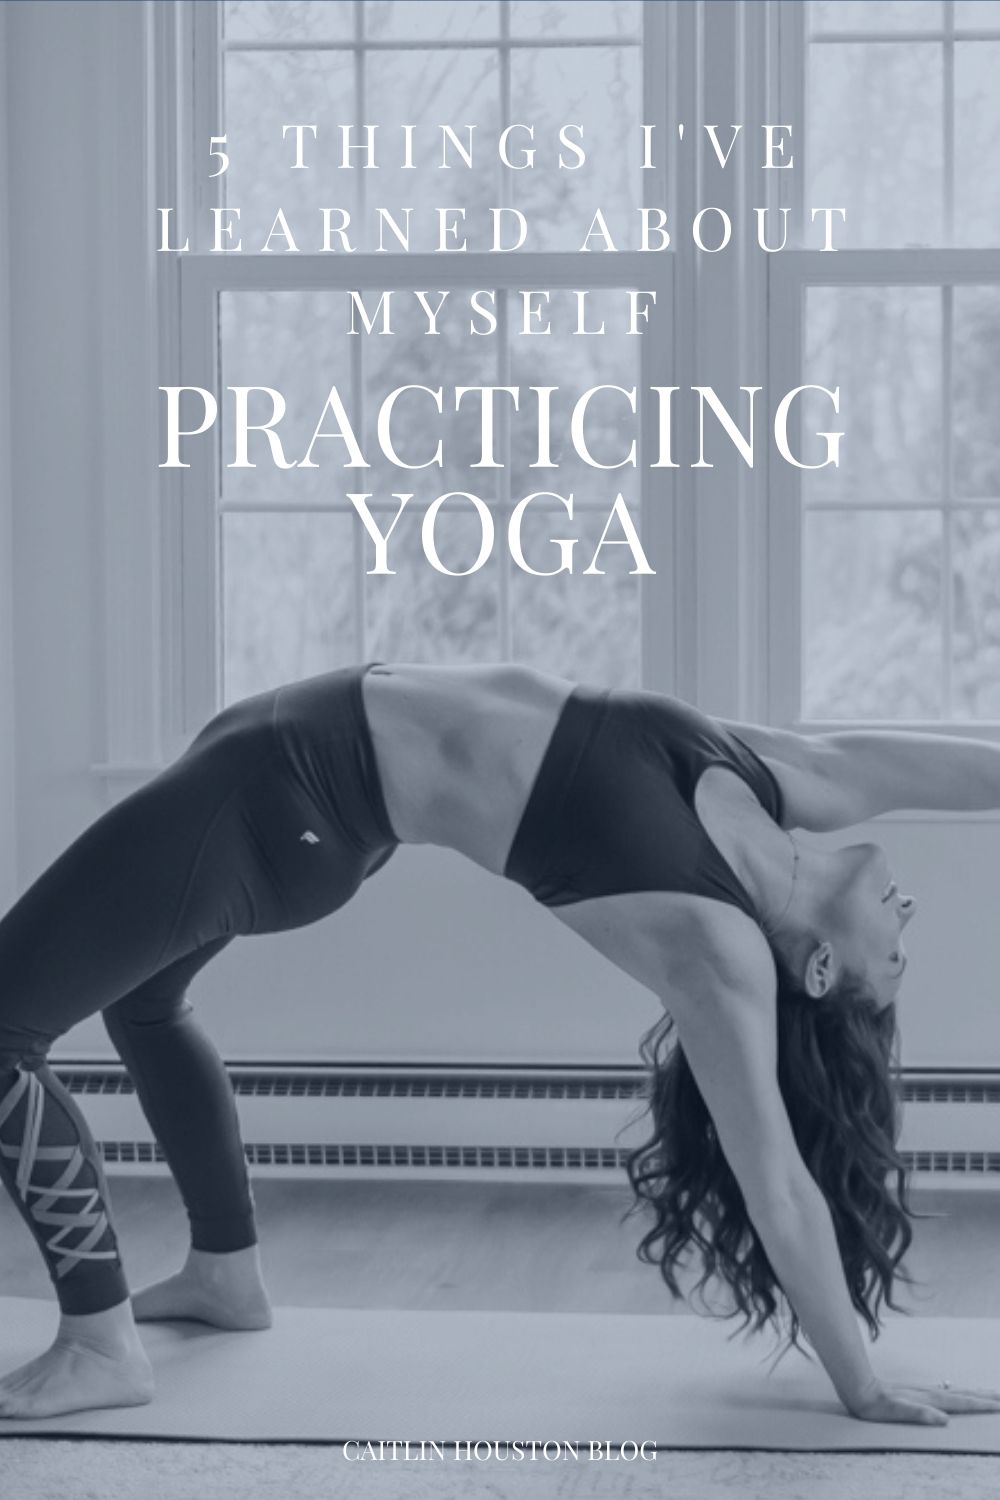 5 Things I've Learned About Myself from Practicing Yoga